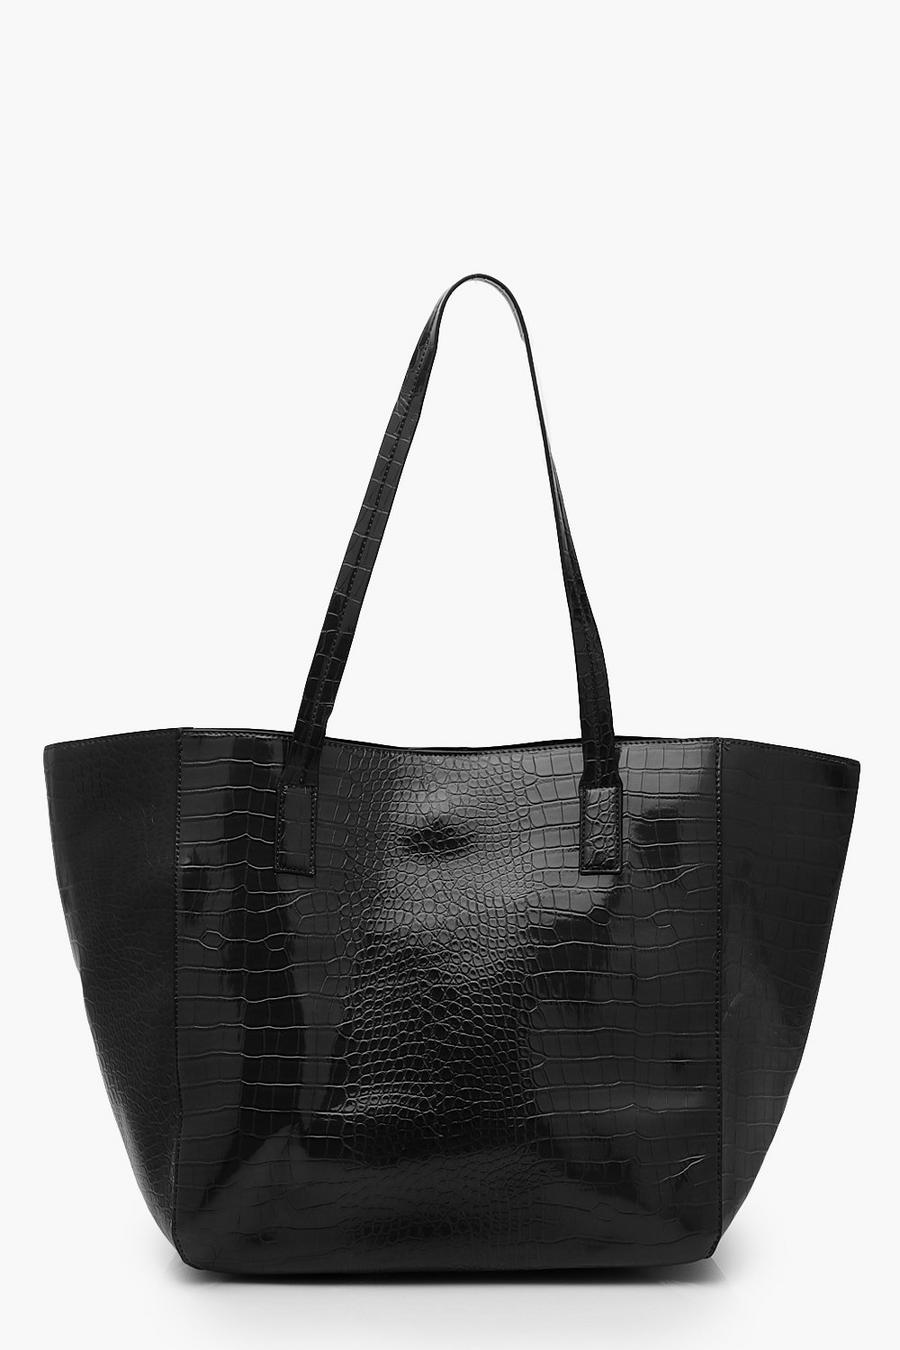 Black Oversized Faux Leather Croc Tote Day Bag